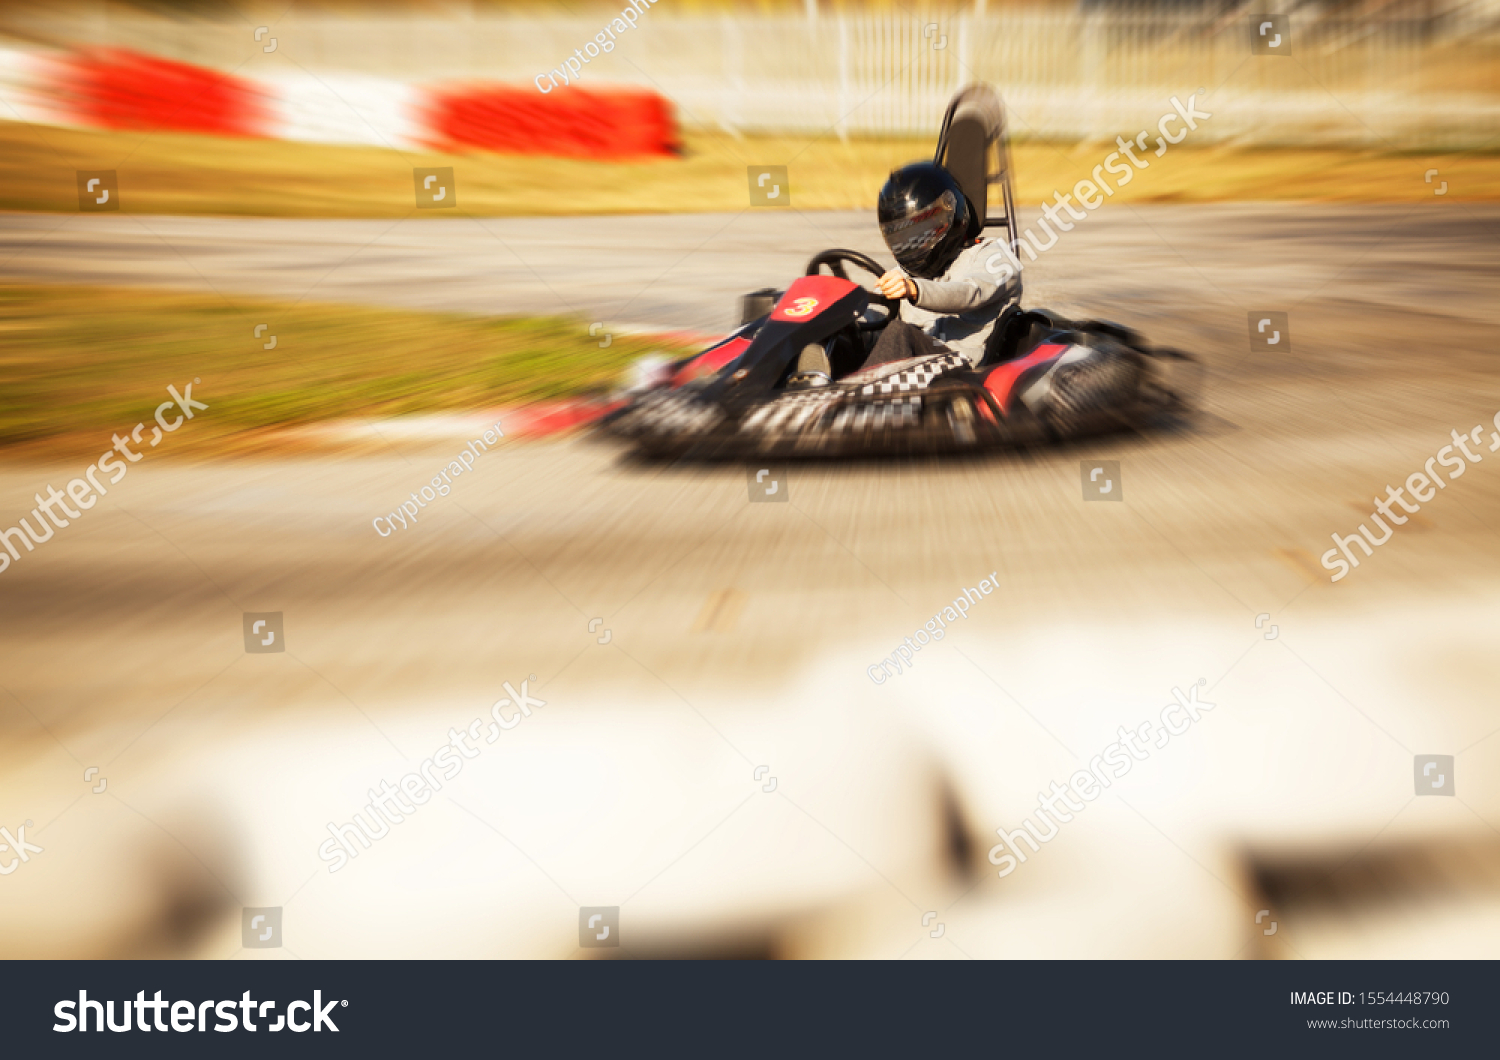 Go kart driver racing on the track, speed and adrenaline, zoom burst photo effect #1554448790